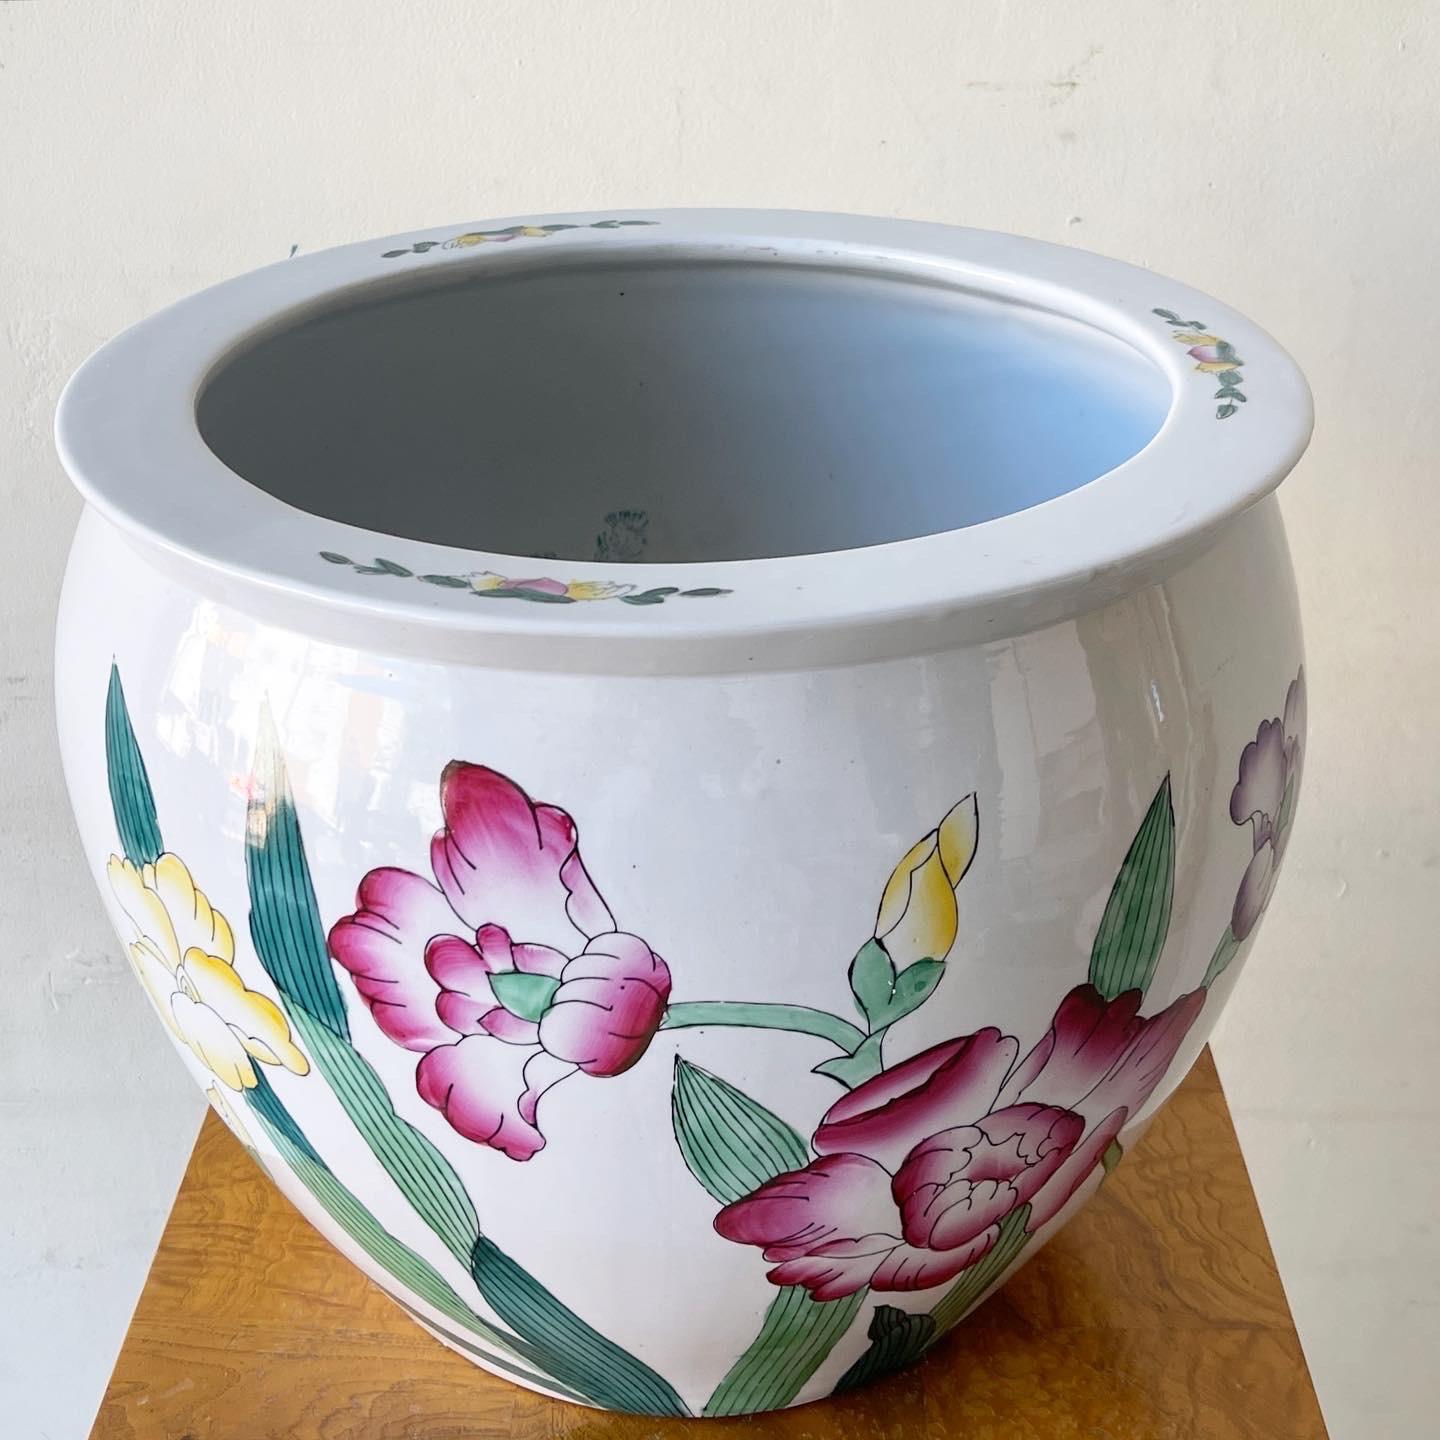 Exceptional vintage chinoiserie planter pot. Features a hand painted display of flowers around the outside with fish painted onto the inside.